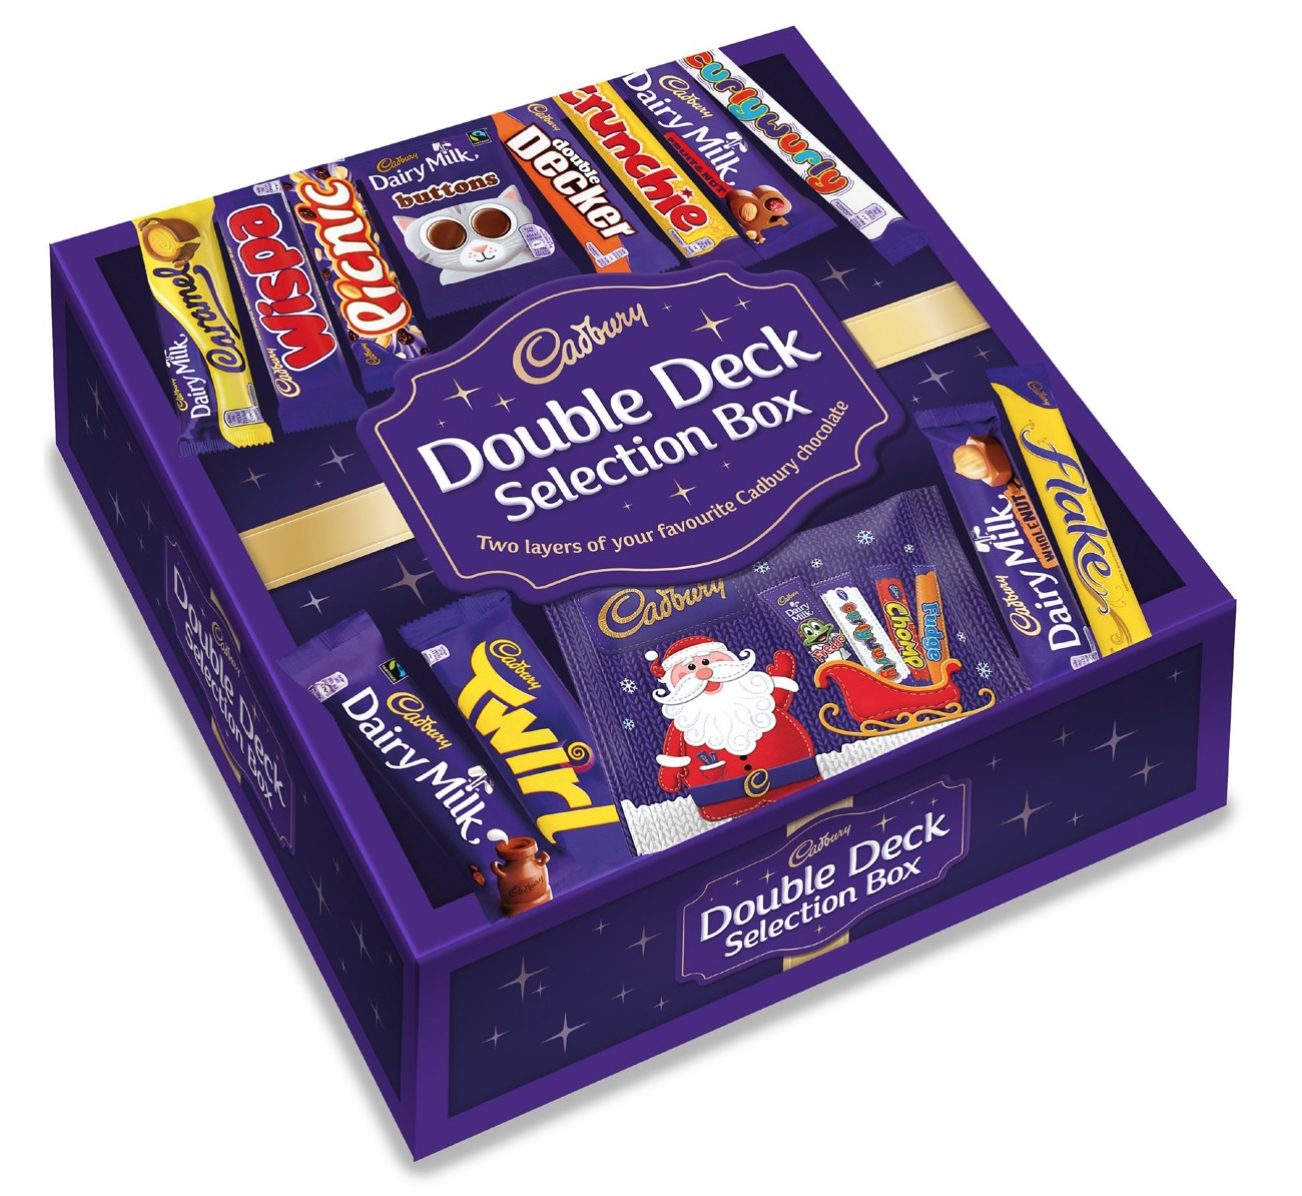 Novel Double-Size Selection Box from Cadbury Gift Direct by Dr Kathleen Thompson ...1302 x 1196